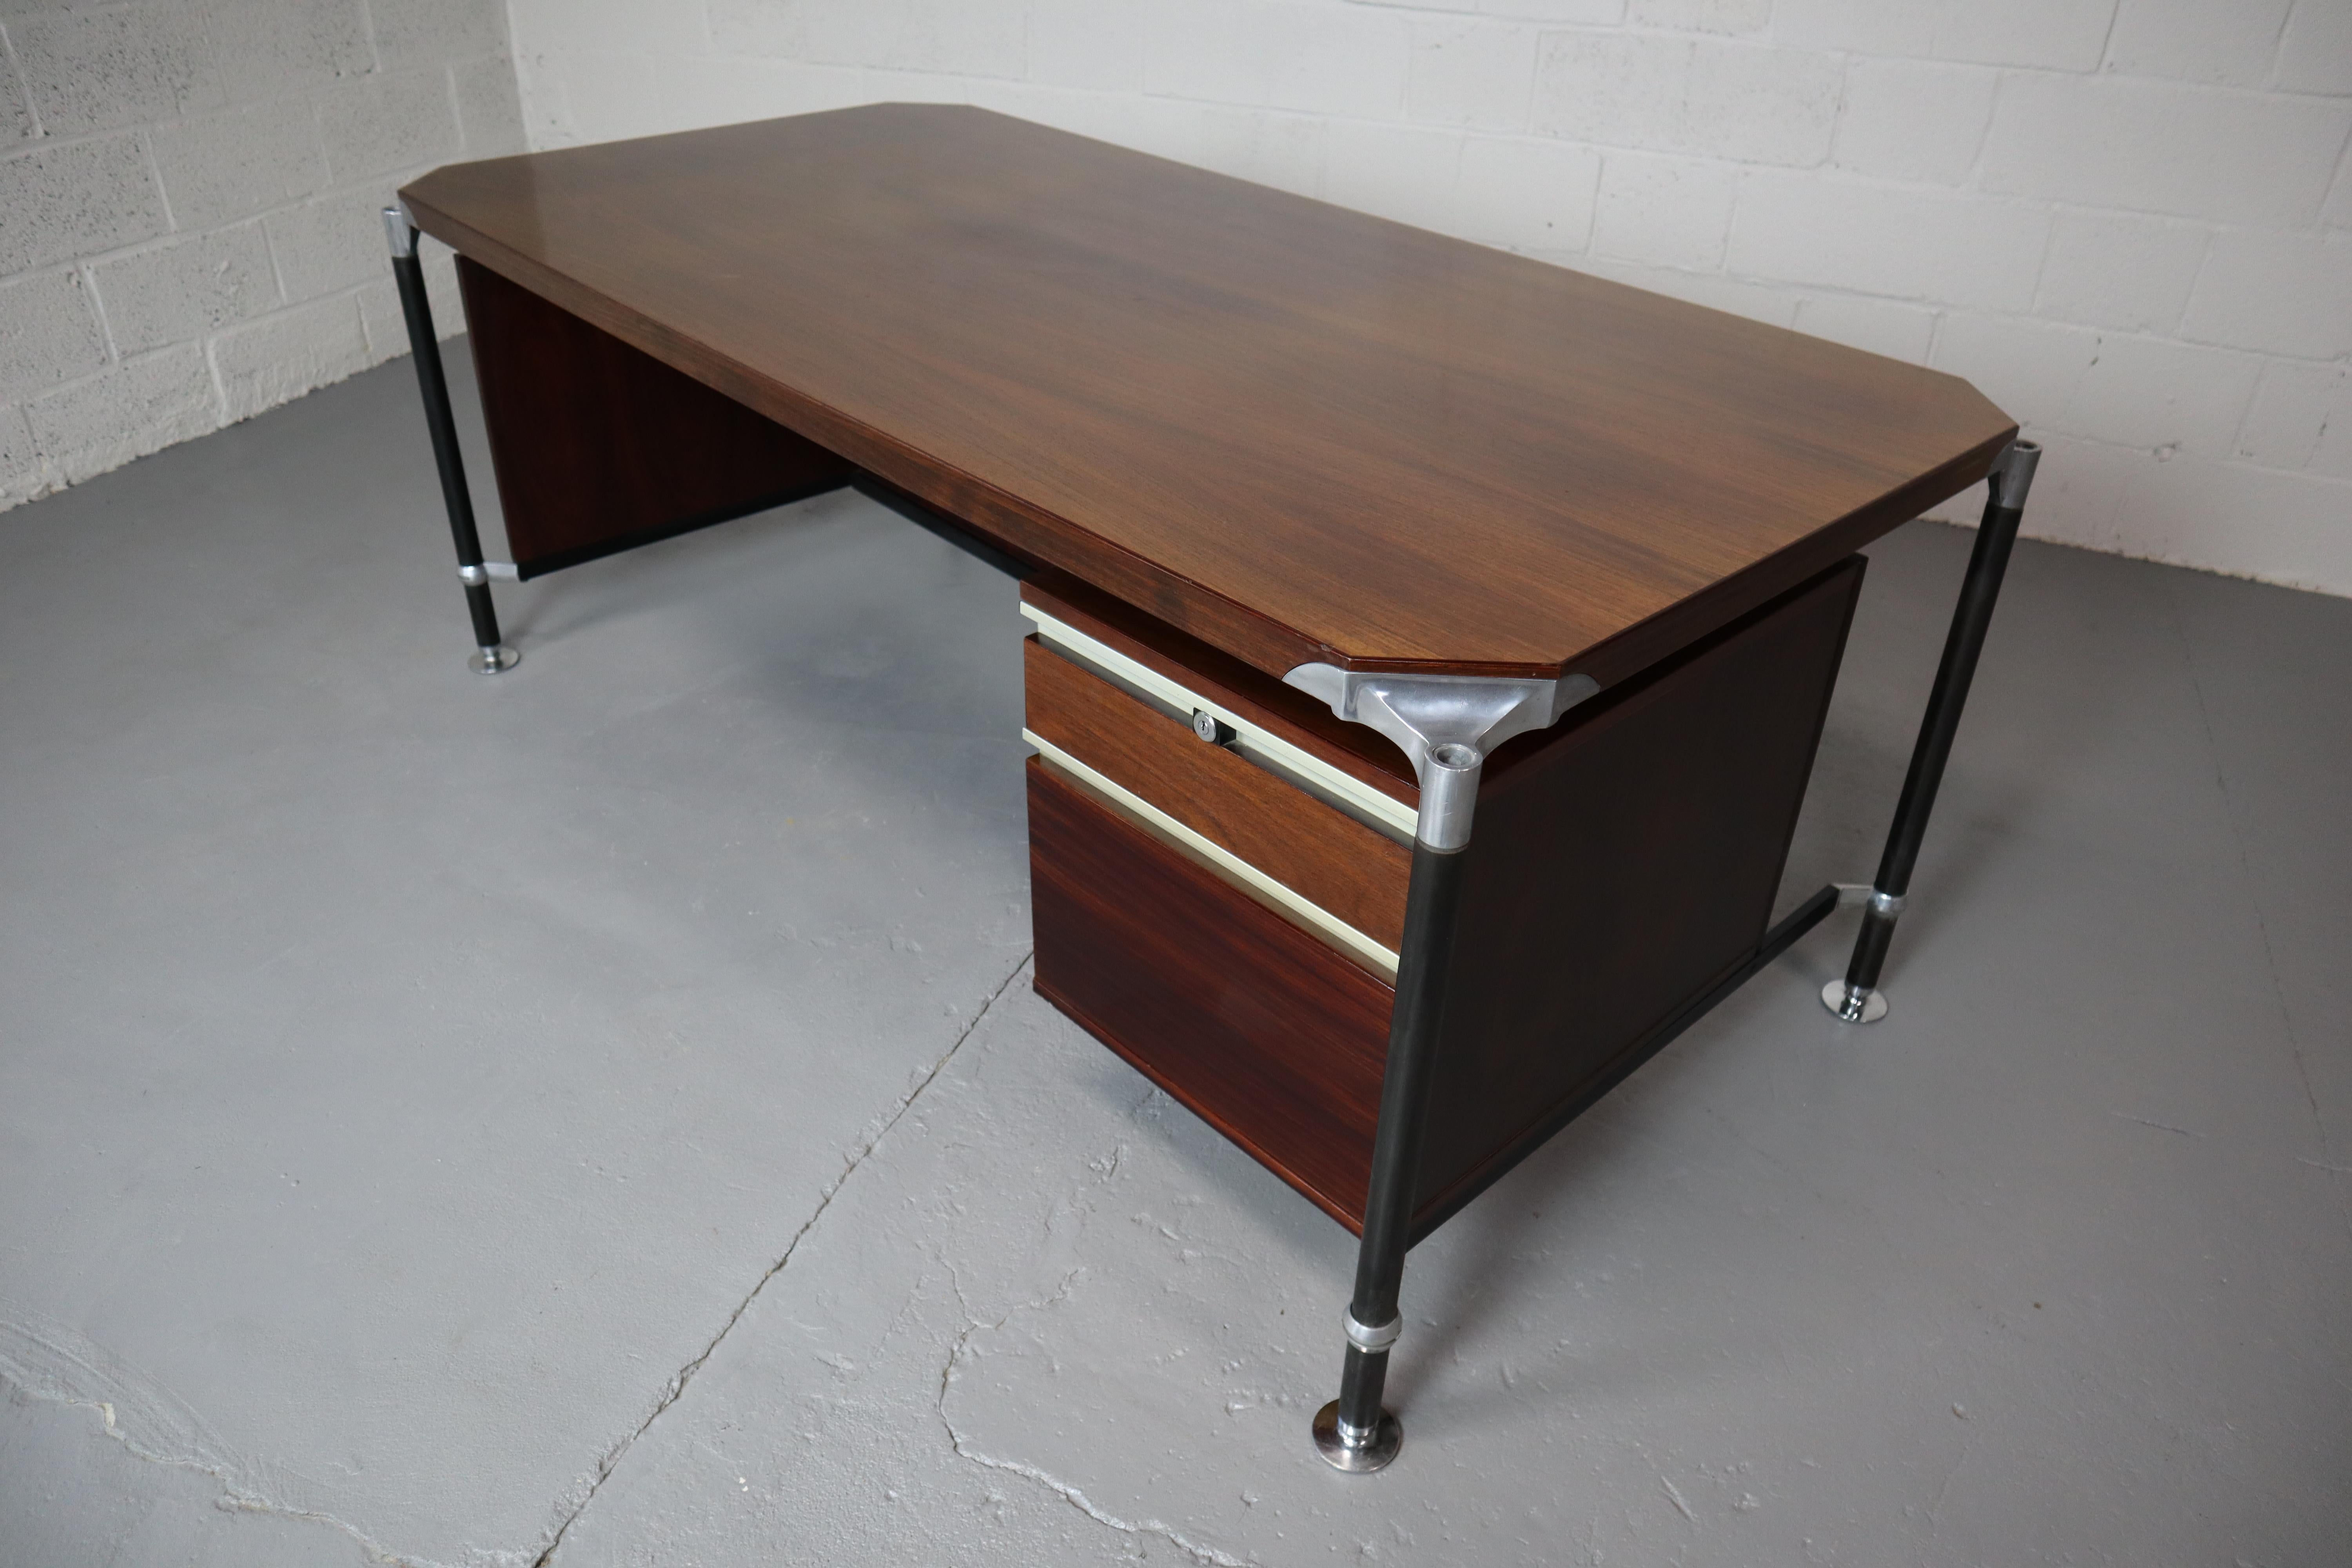 An Italian executive desk in Rosewood designed by Luisa & Ico Parisi in the 1960’s and manufactured by MIM (Mobil Italian Moderni). The frame is made of black lacquered steel and polished aluminium. 
Model Urio!
Working lock and keys!

Matching